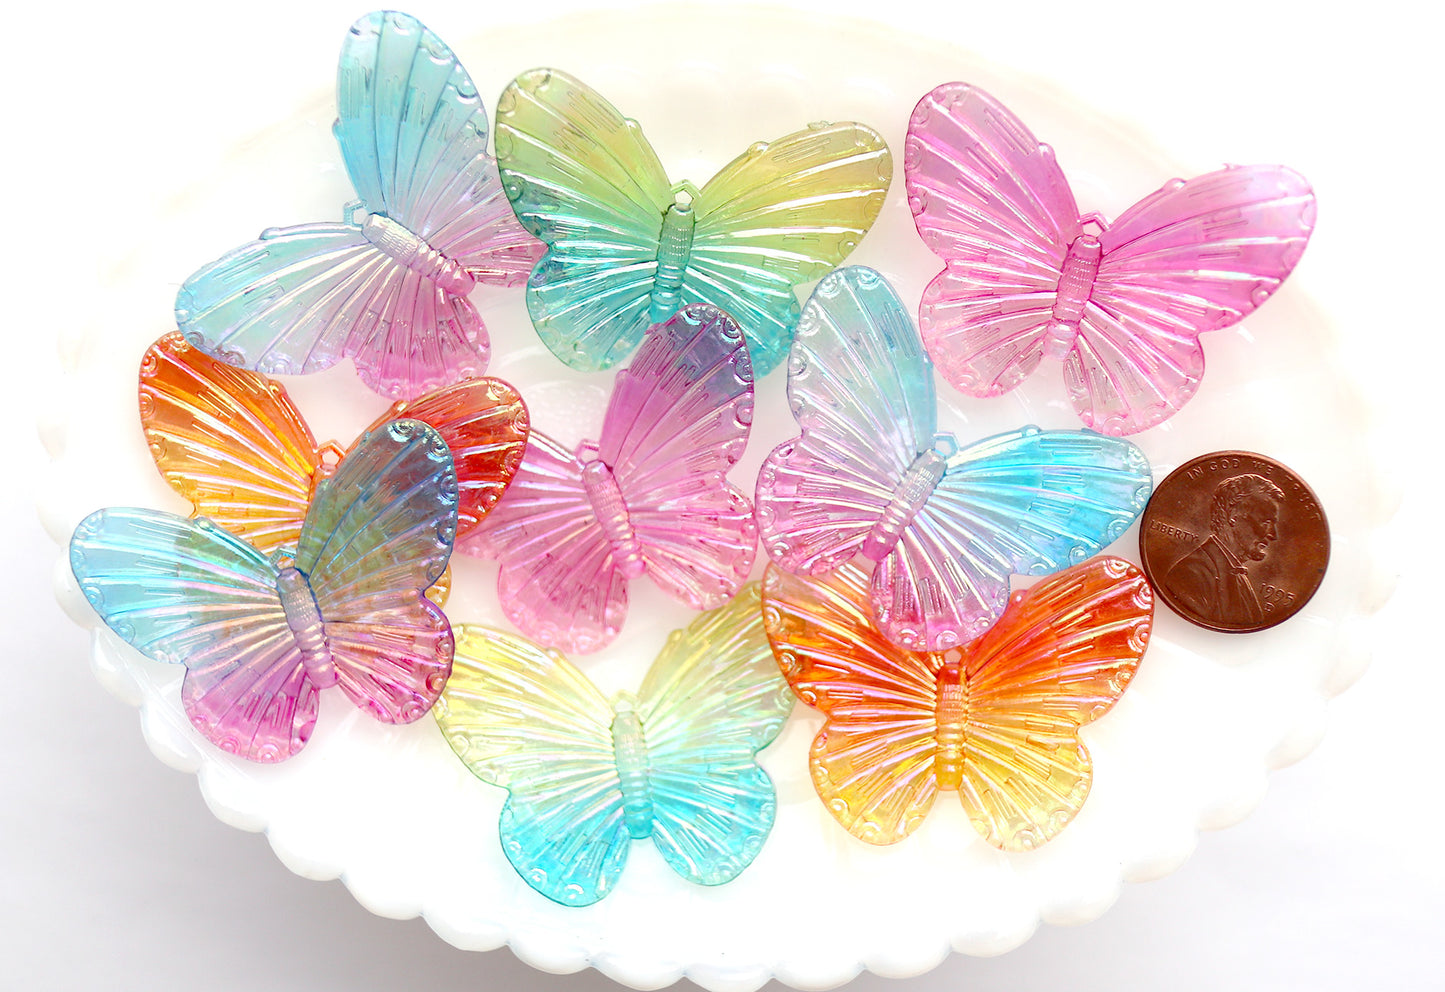 Butterfly Charms - 30mm Big AB Iridescent Butterfly Resin or Acrylic Plastic Charms or Pendants - 8 pc set